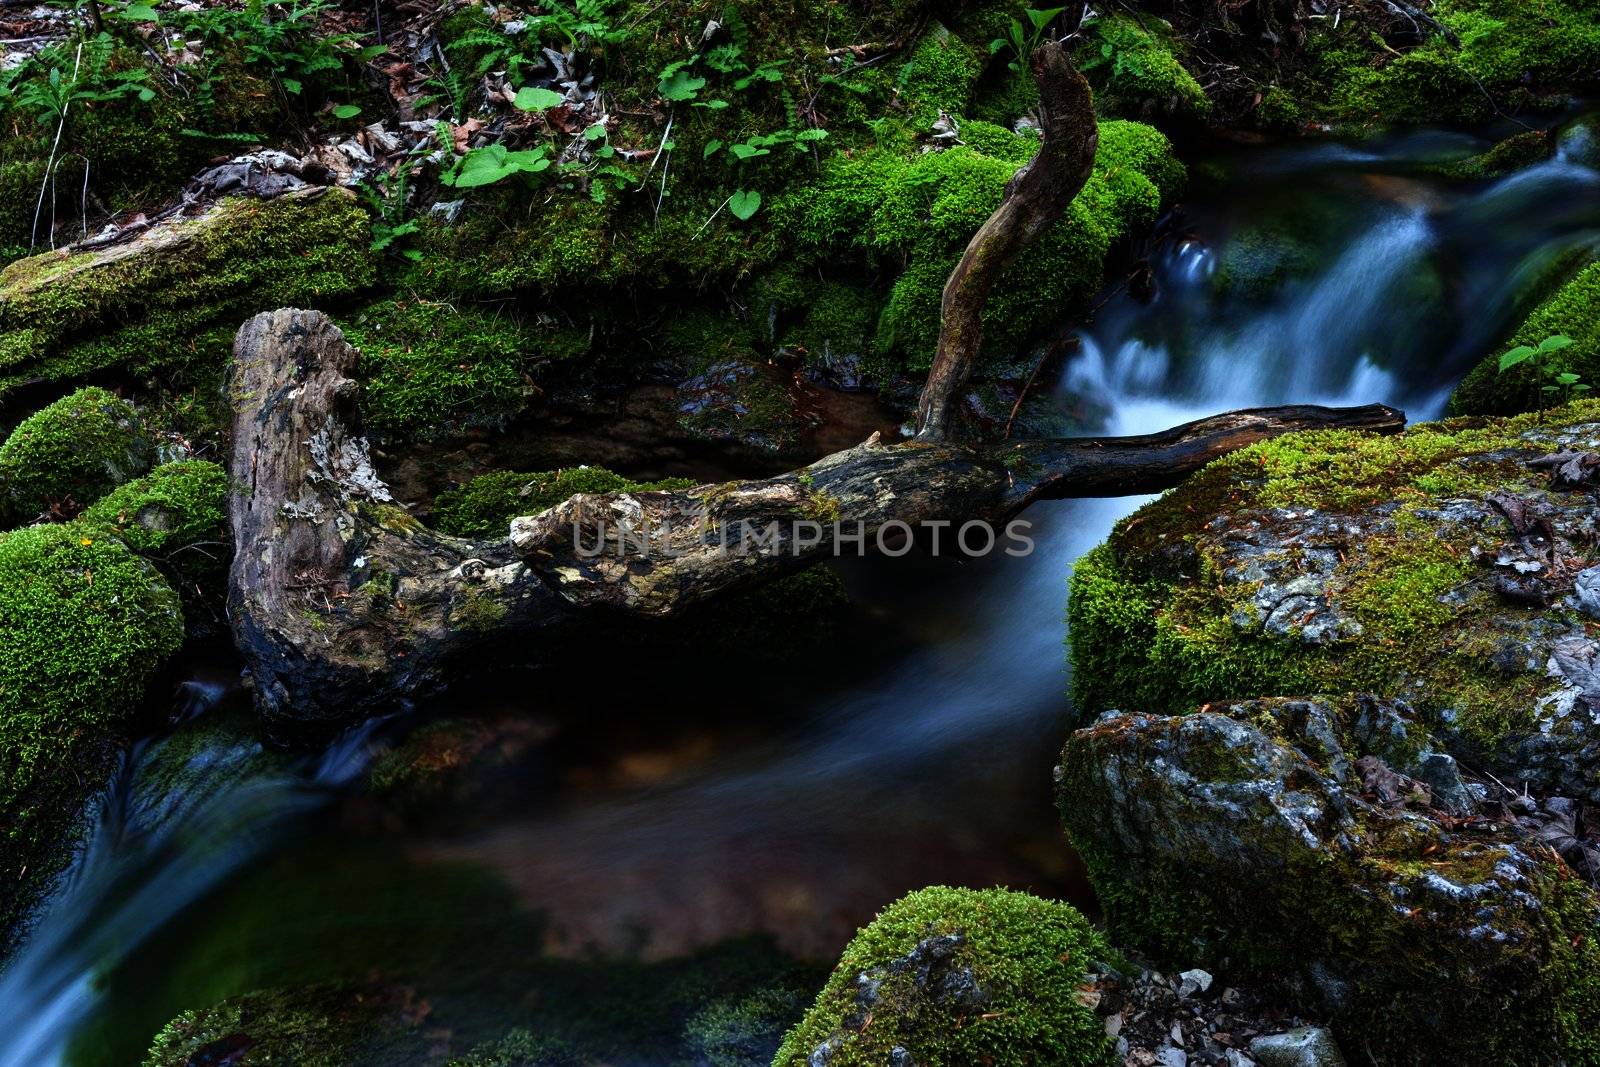 Water flowing over rocks covered with moss in small stream.